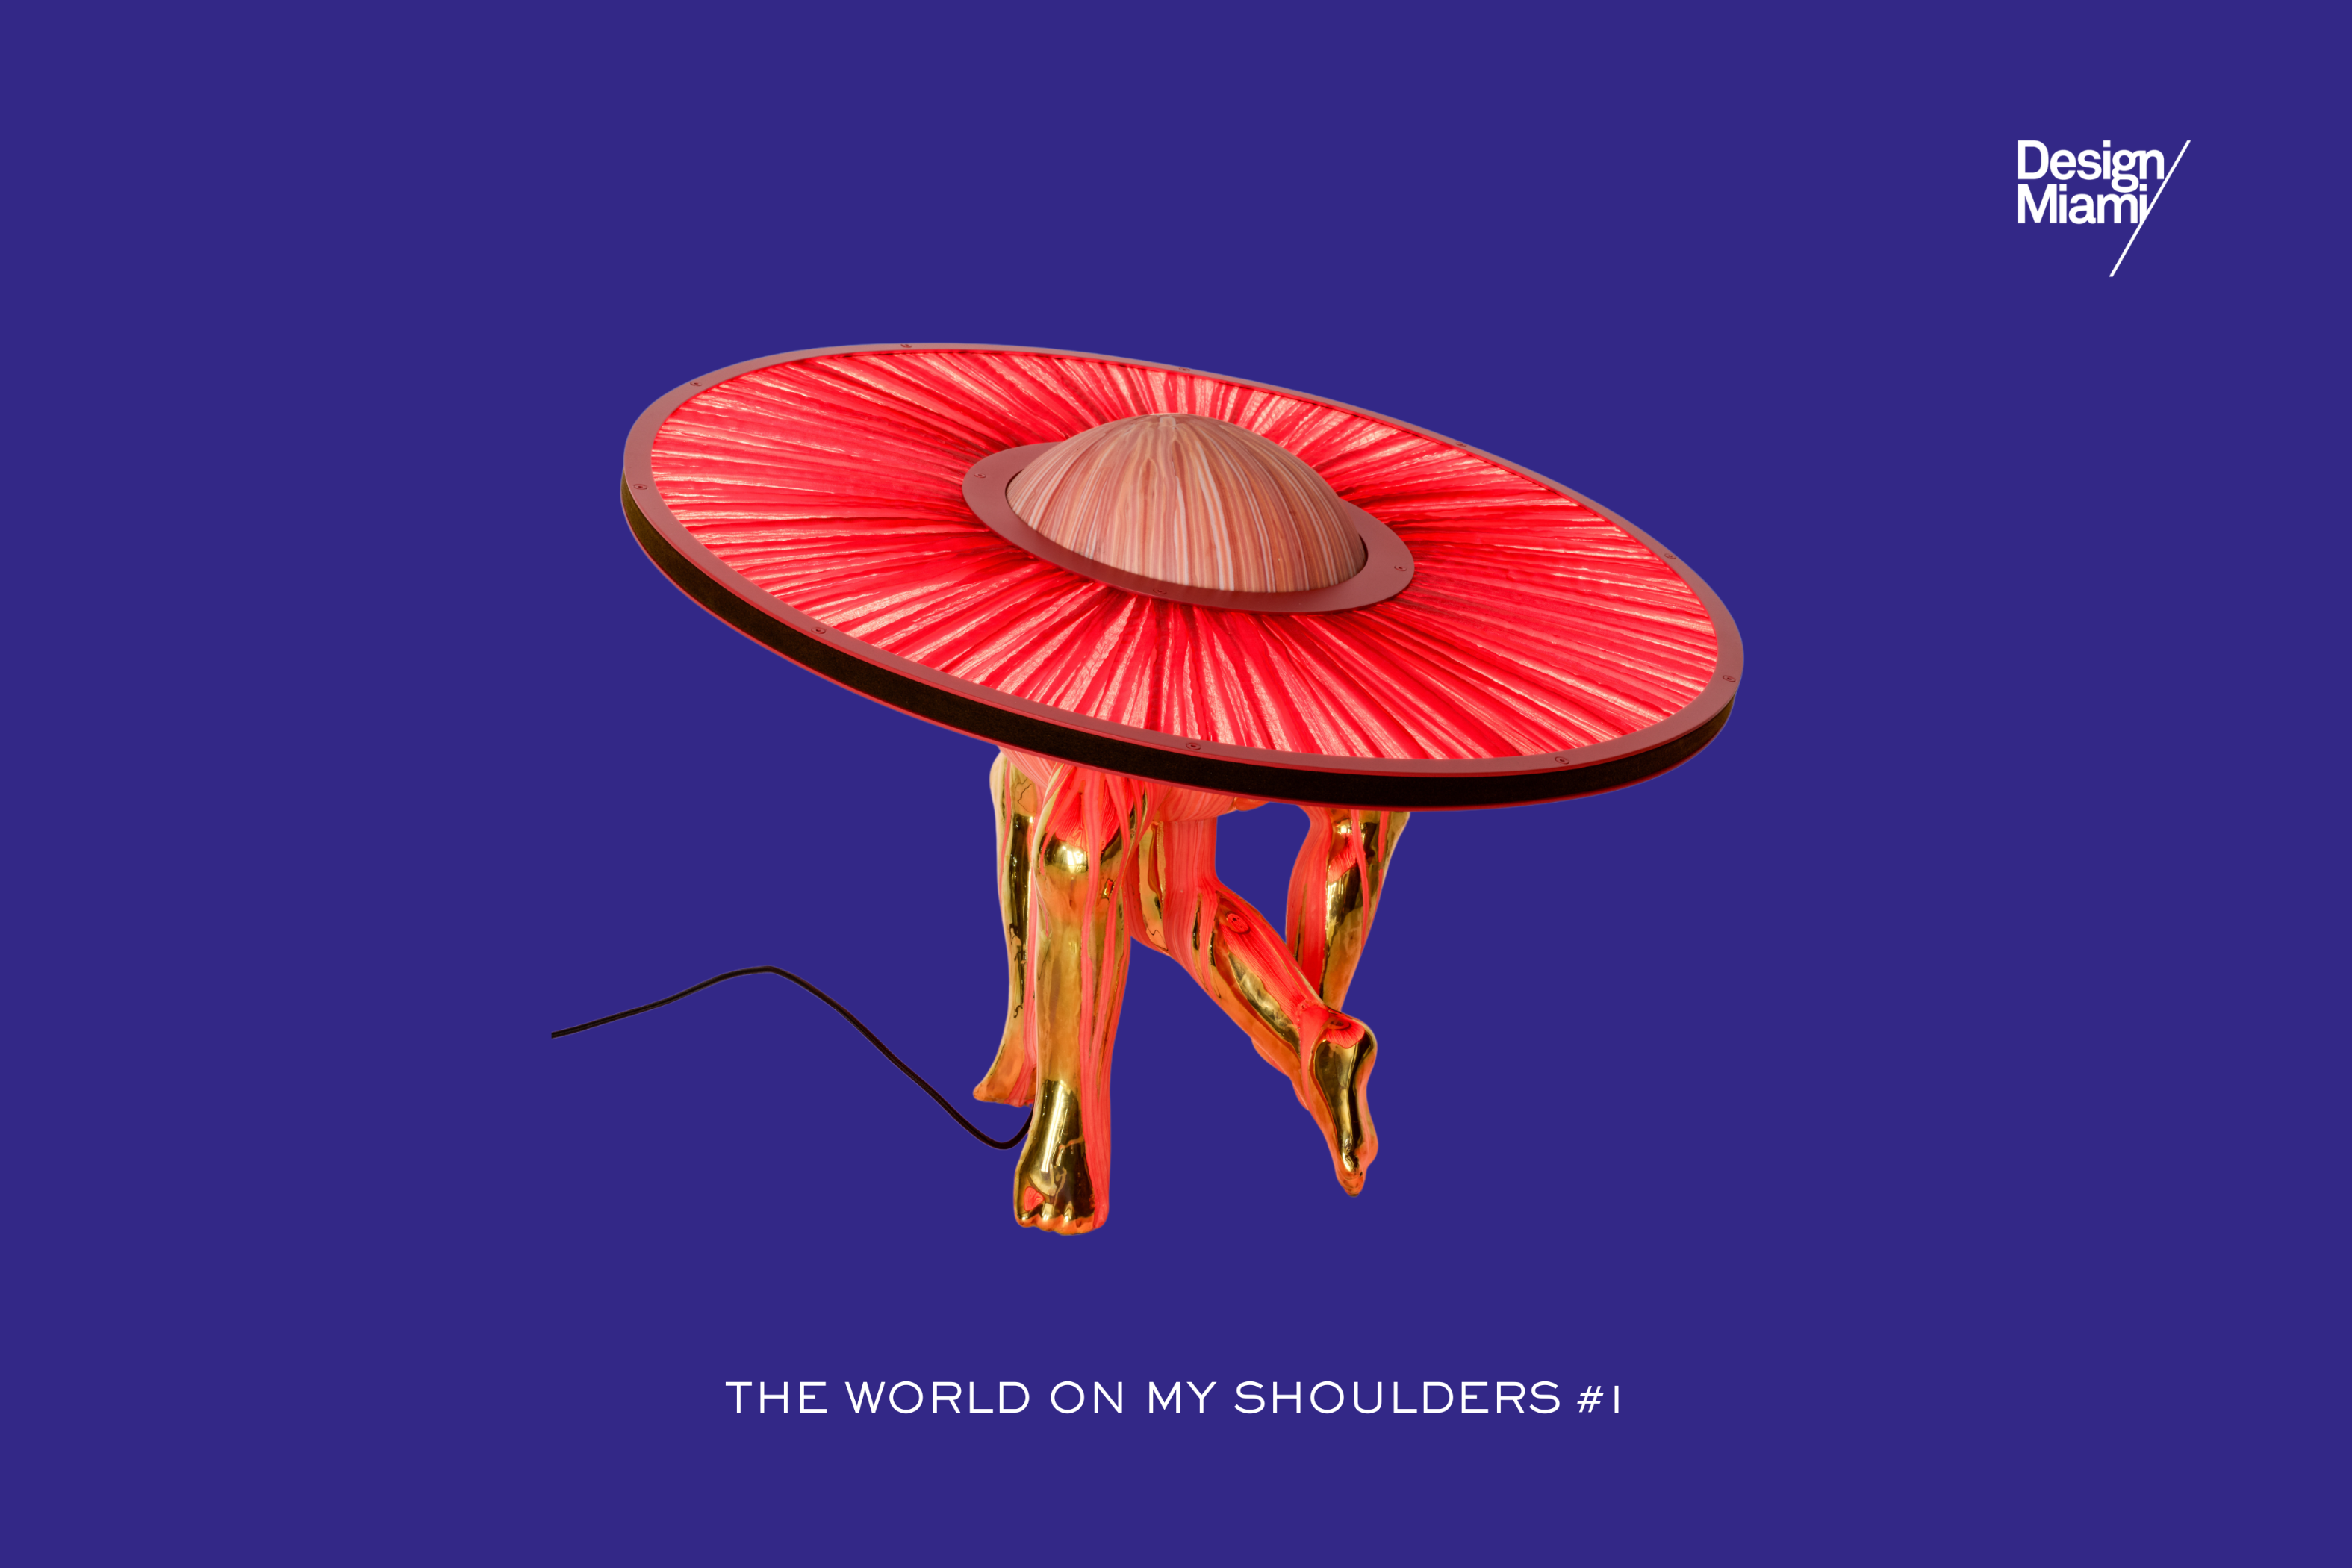 The World on My Shoulders #1